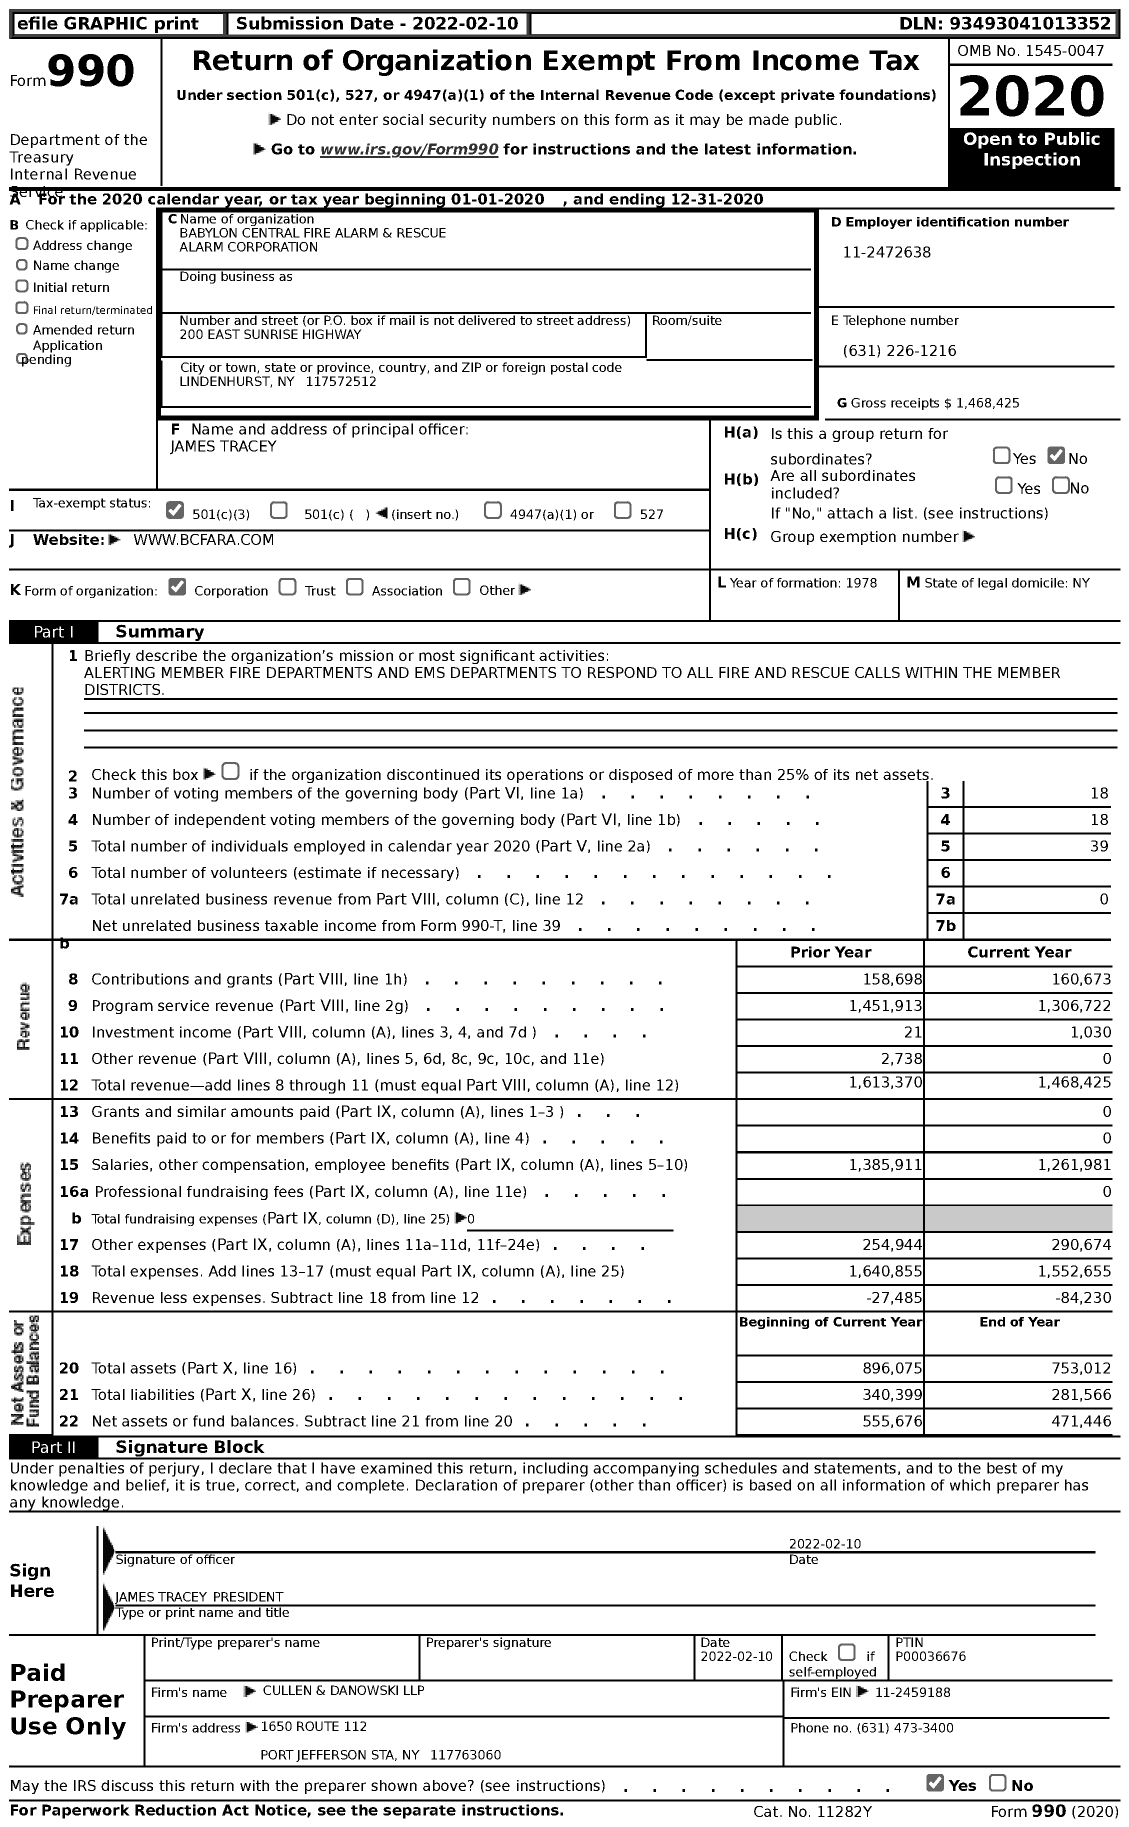 Image of first page of 2020 Form 990 for Babylon Central Fire Alarm and Rescue Alarm Corporation